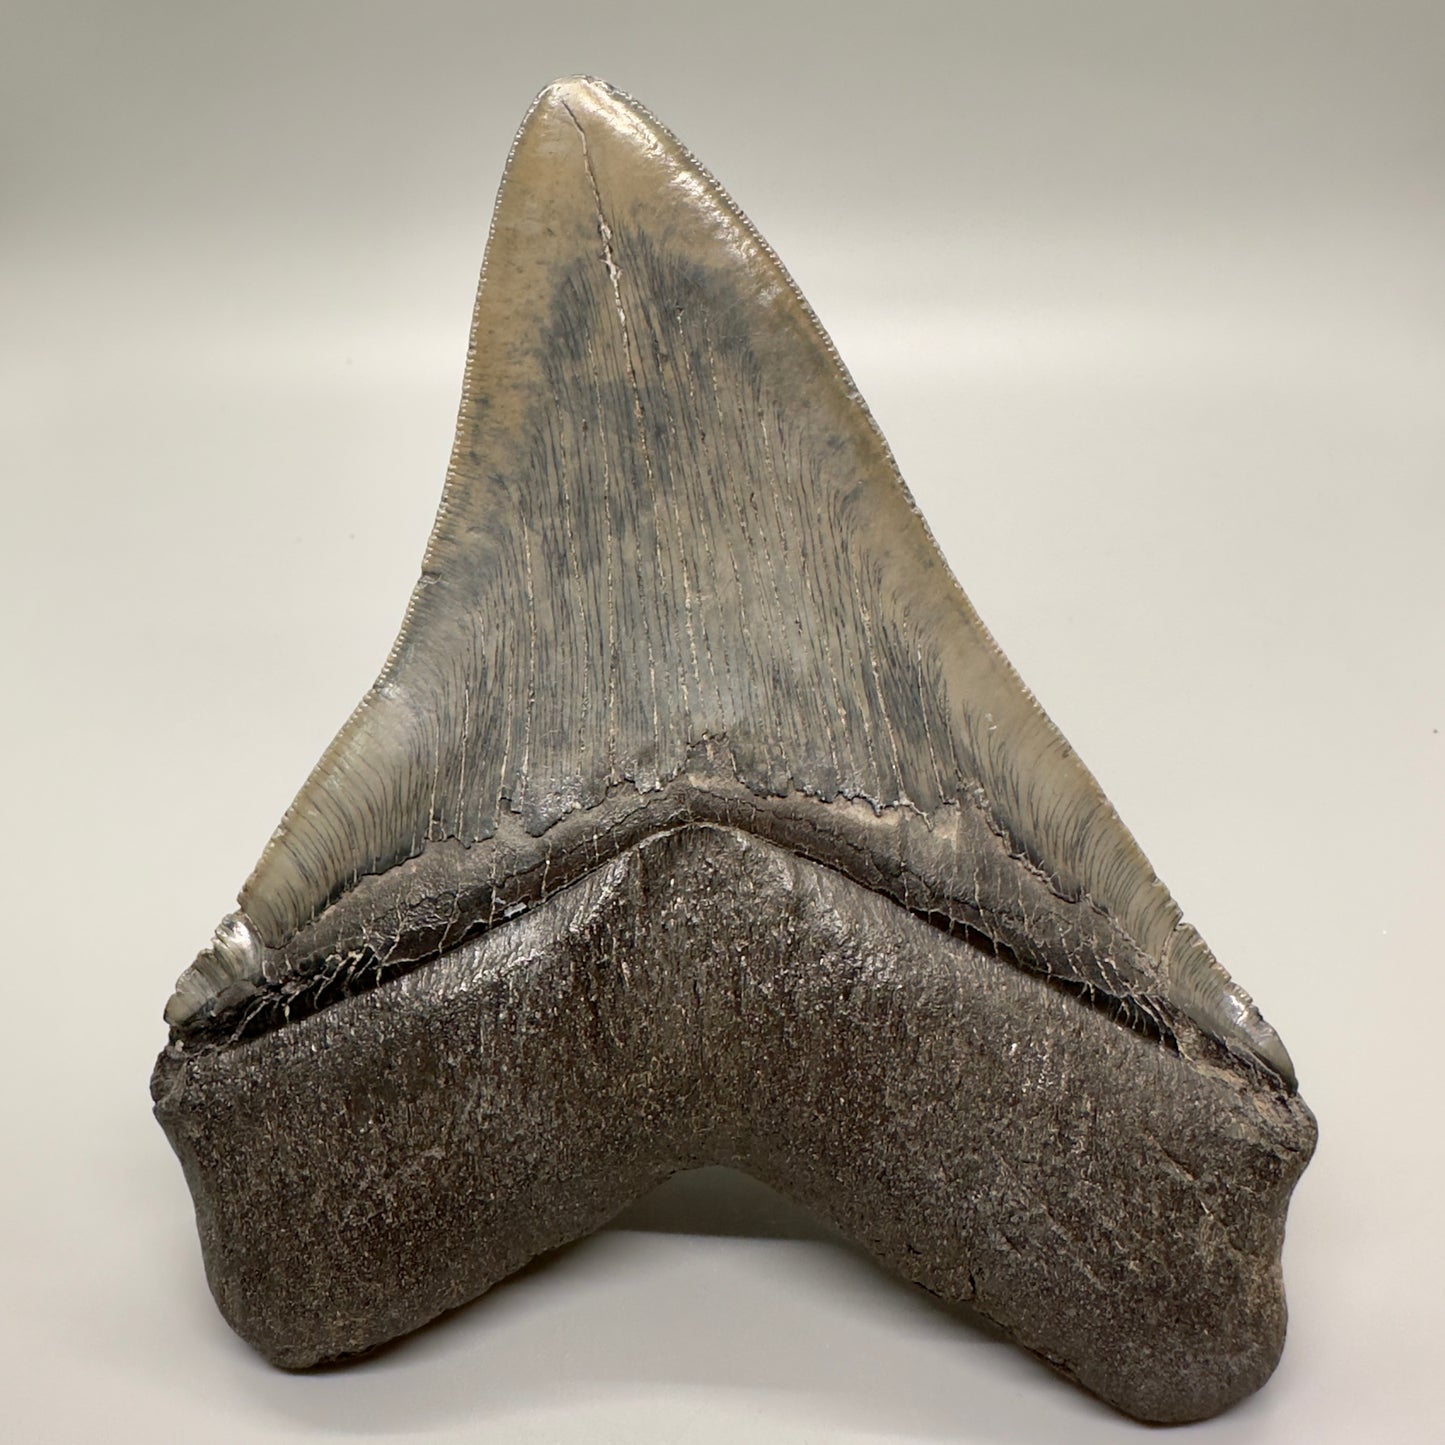 EXTRA LARGE 6.05" Fossil Megalodon Tooth: Scuba Diving Discovery from Southeast USA CM4606 - Back